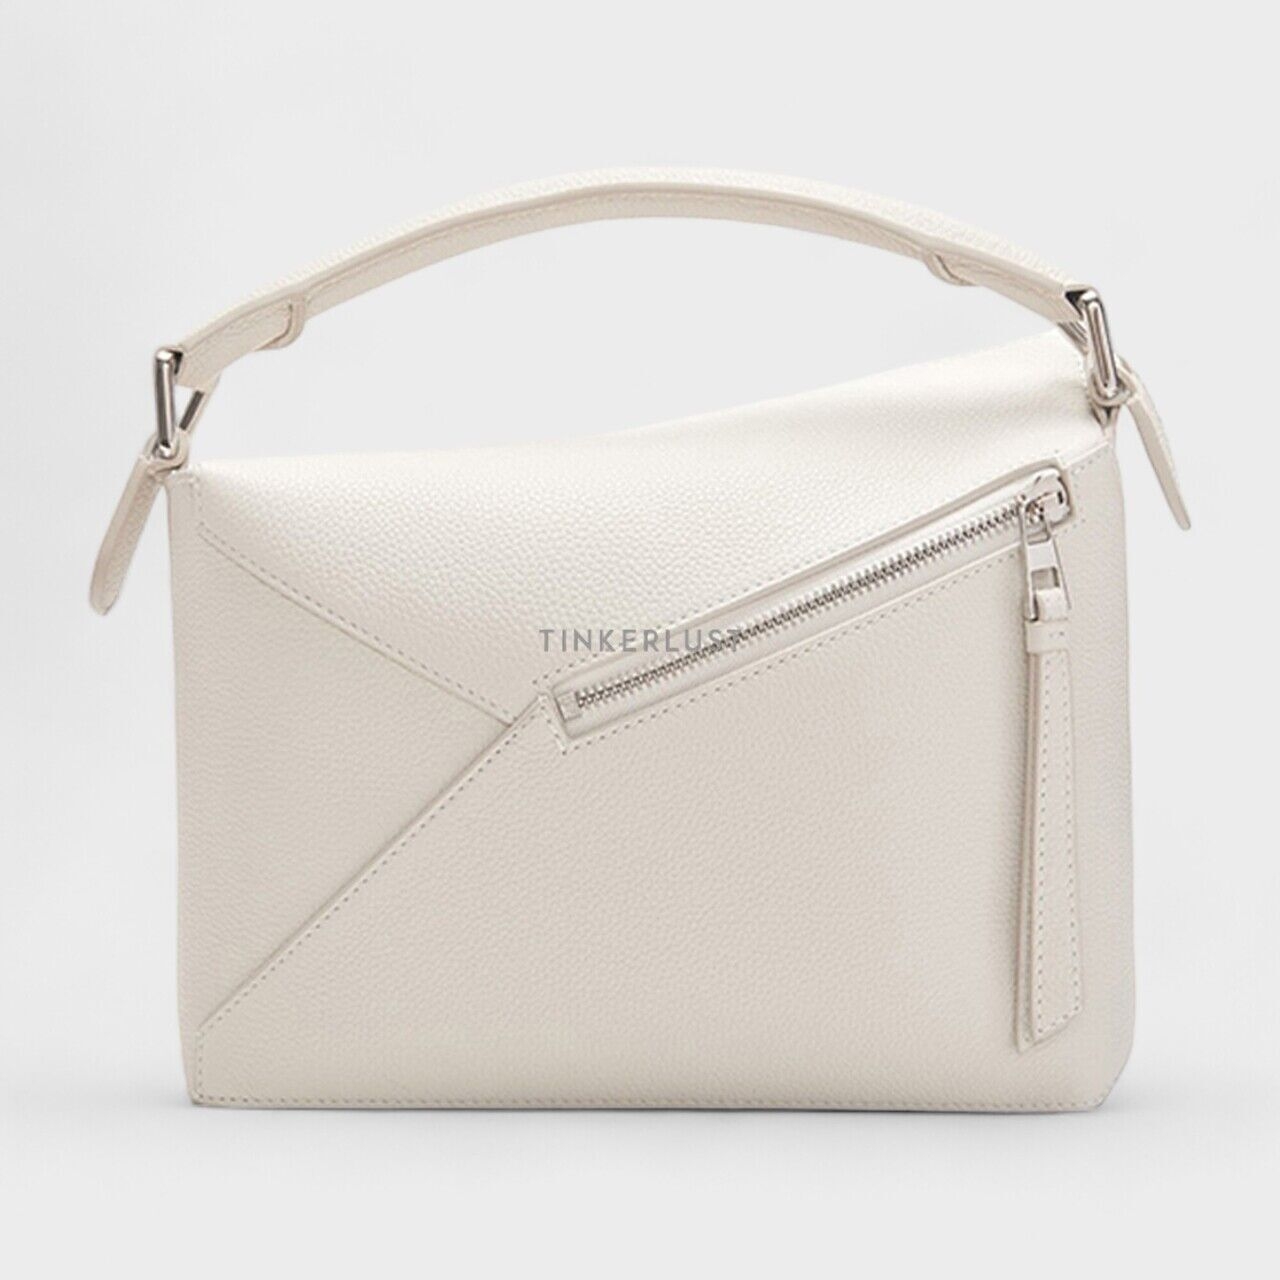 Loewe Small Puzzle Edge Bag in Soft White Soft Grained Calfskin Satchel Bag